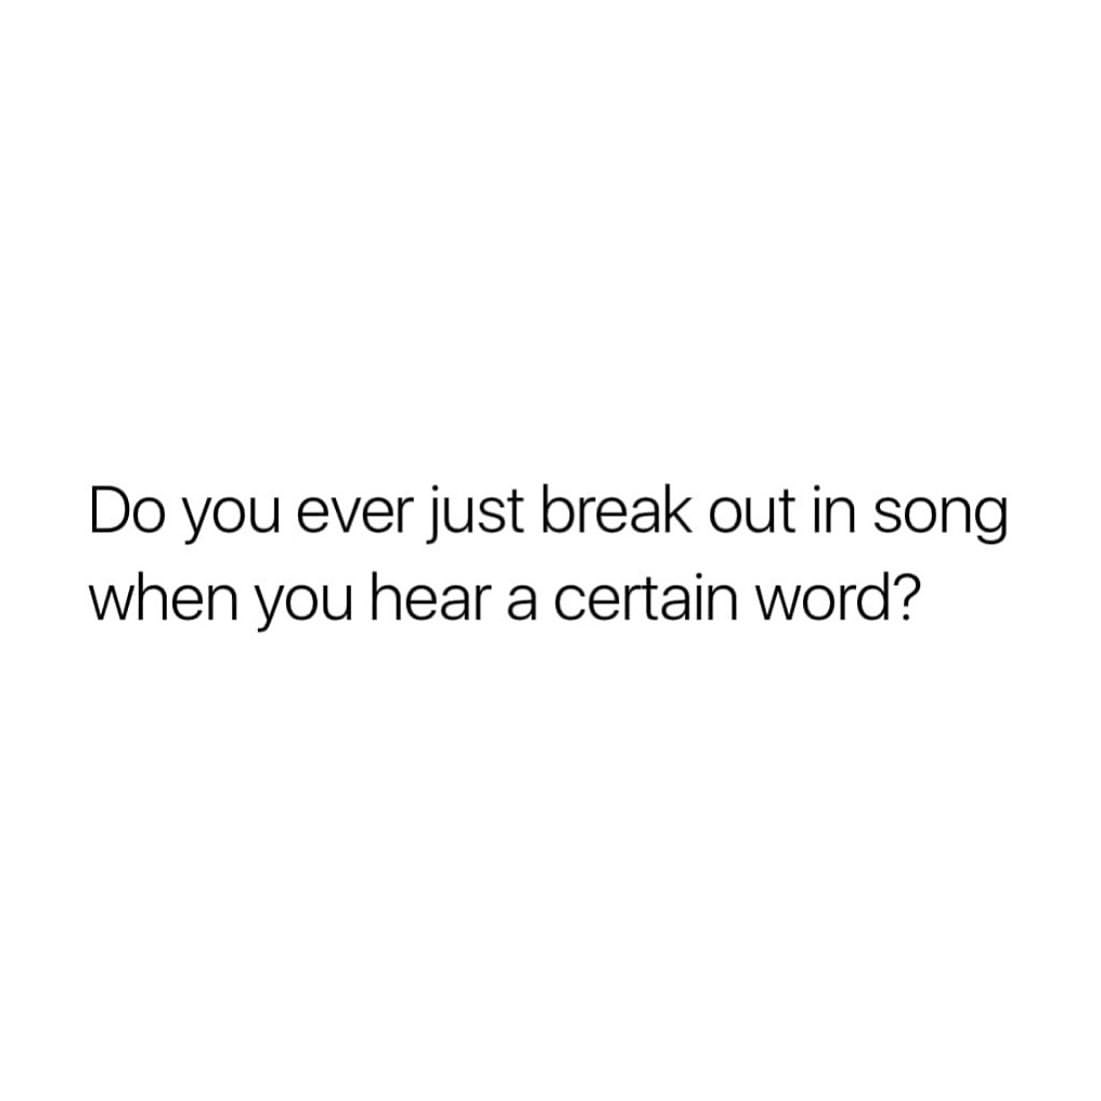 Do you ever just break out in song when you hear a certain word?